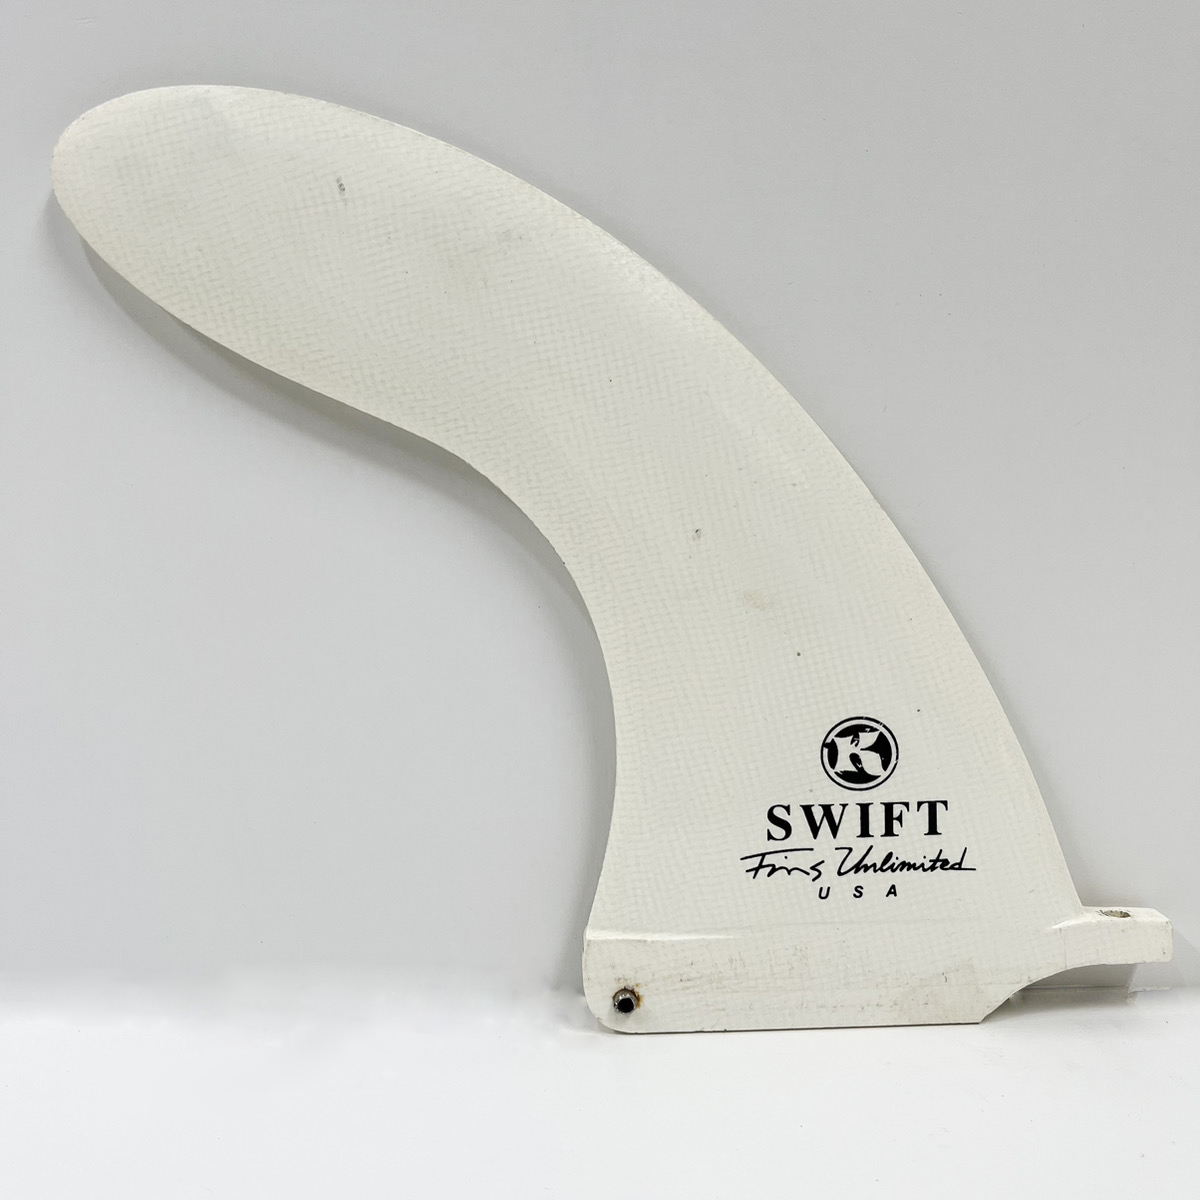 【USED FIN】FINS UNLIMITED USA SWIFT SPRING 7ft  中古フィン